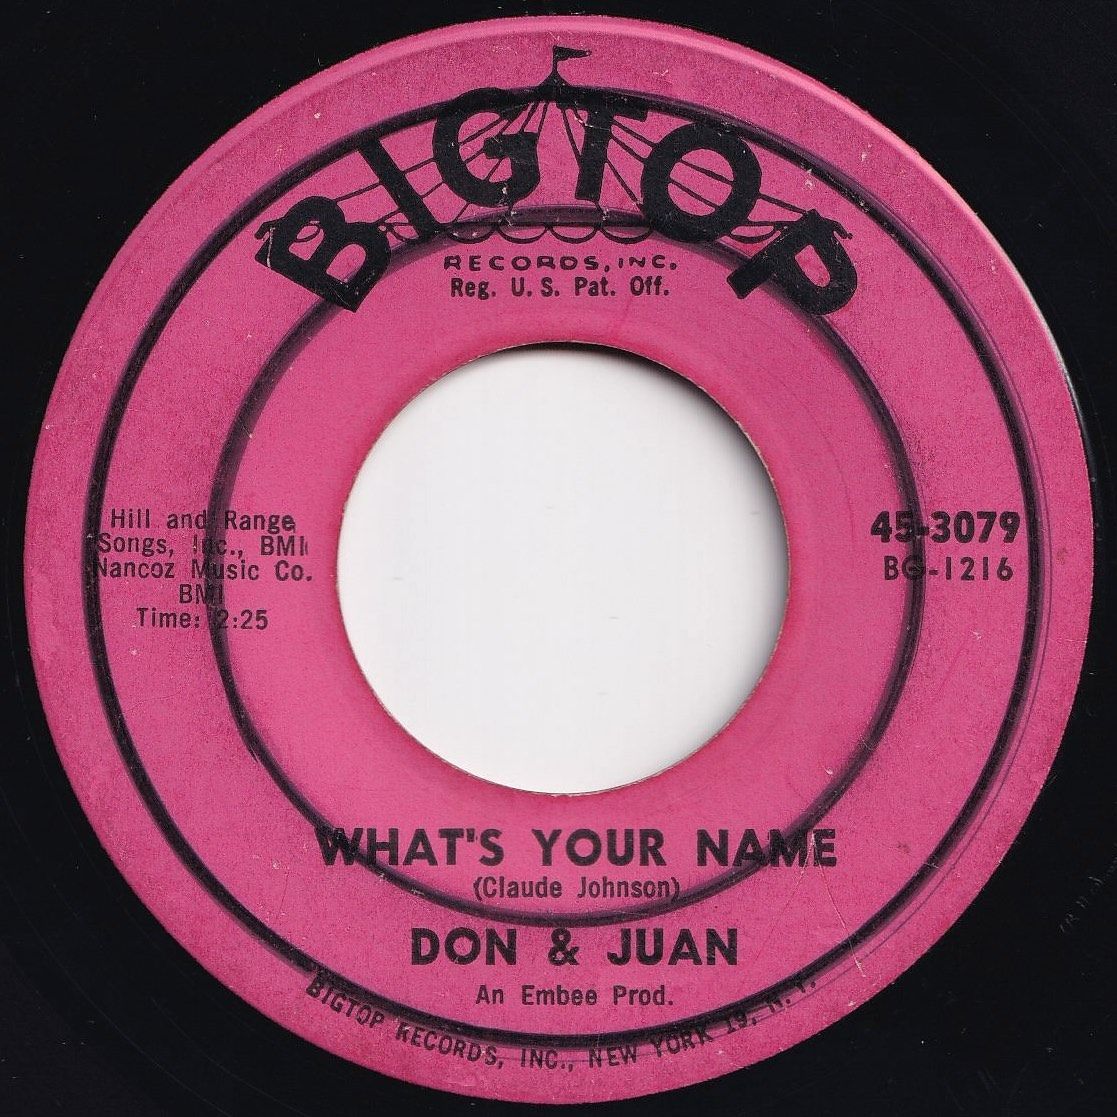 Don & Juan What's Your Name / Chicken Necks Bigtop US 45-3079 203483 R&B R&R レコード 7インチ 45 - Solidity Records - メルカリ